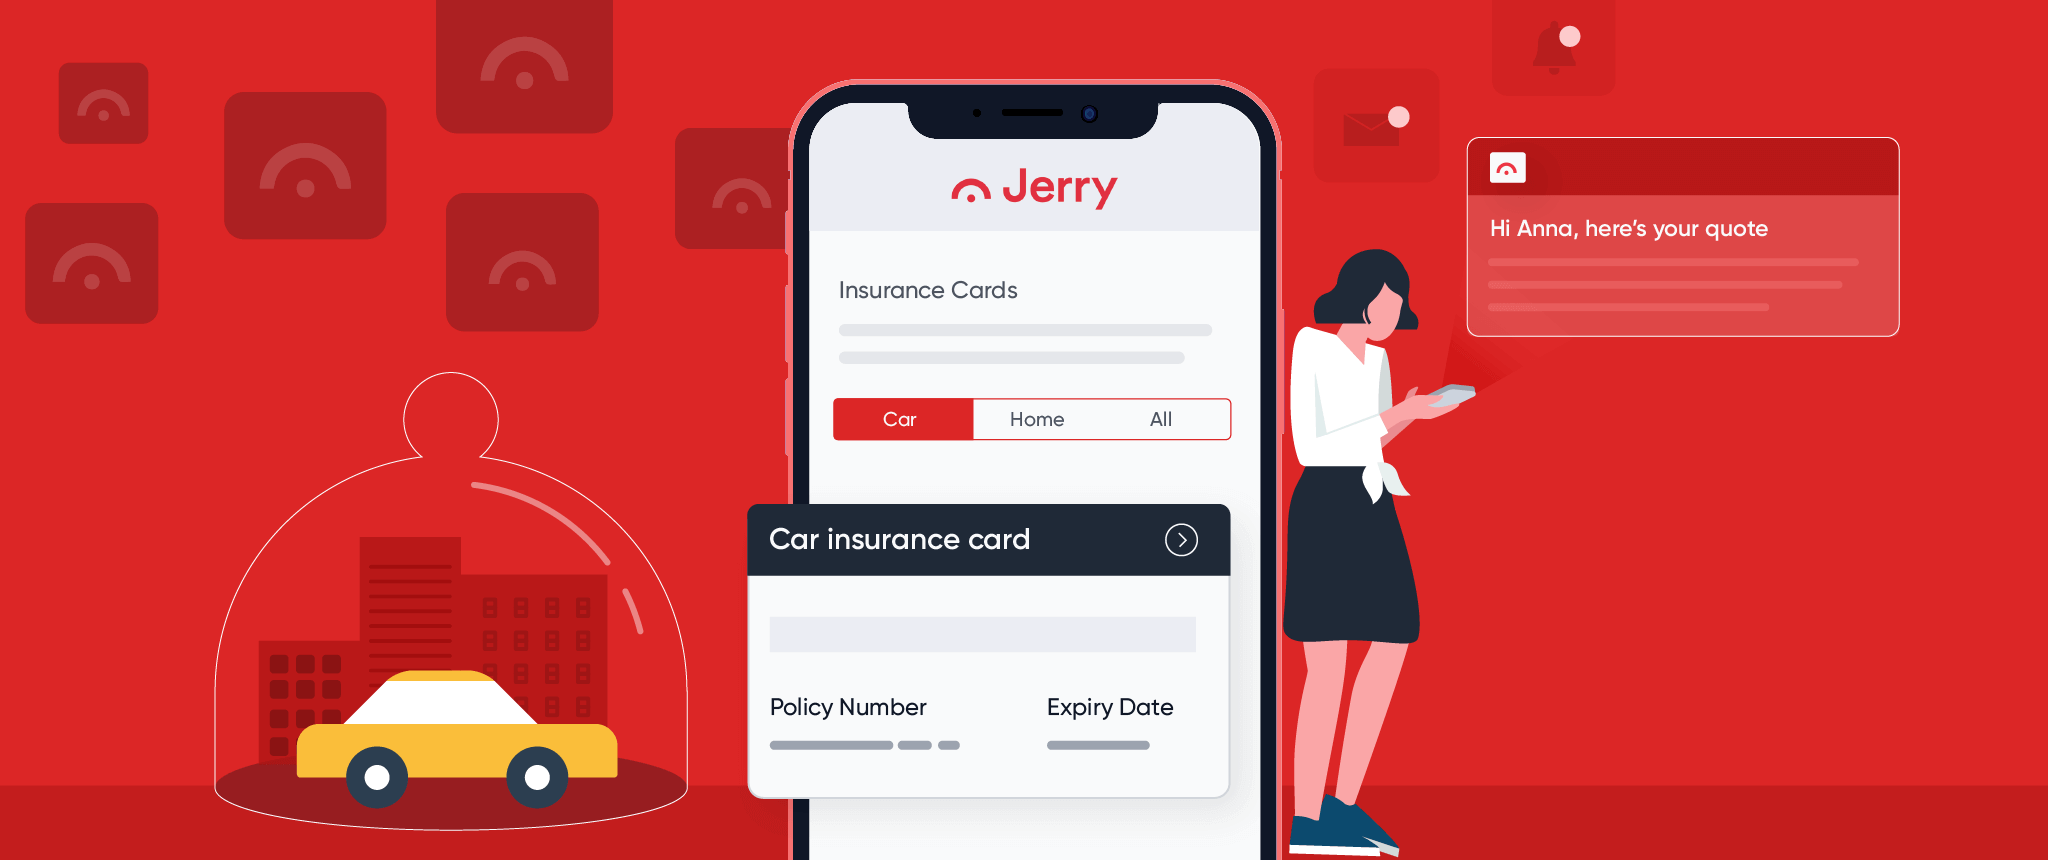 Website personalization is one of several tactics used by Jerry to promote its insurtech app.